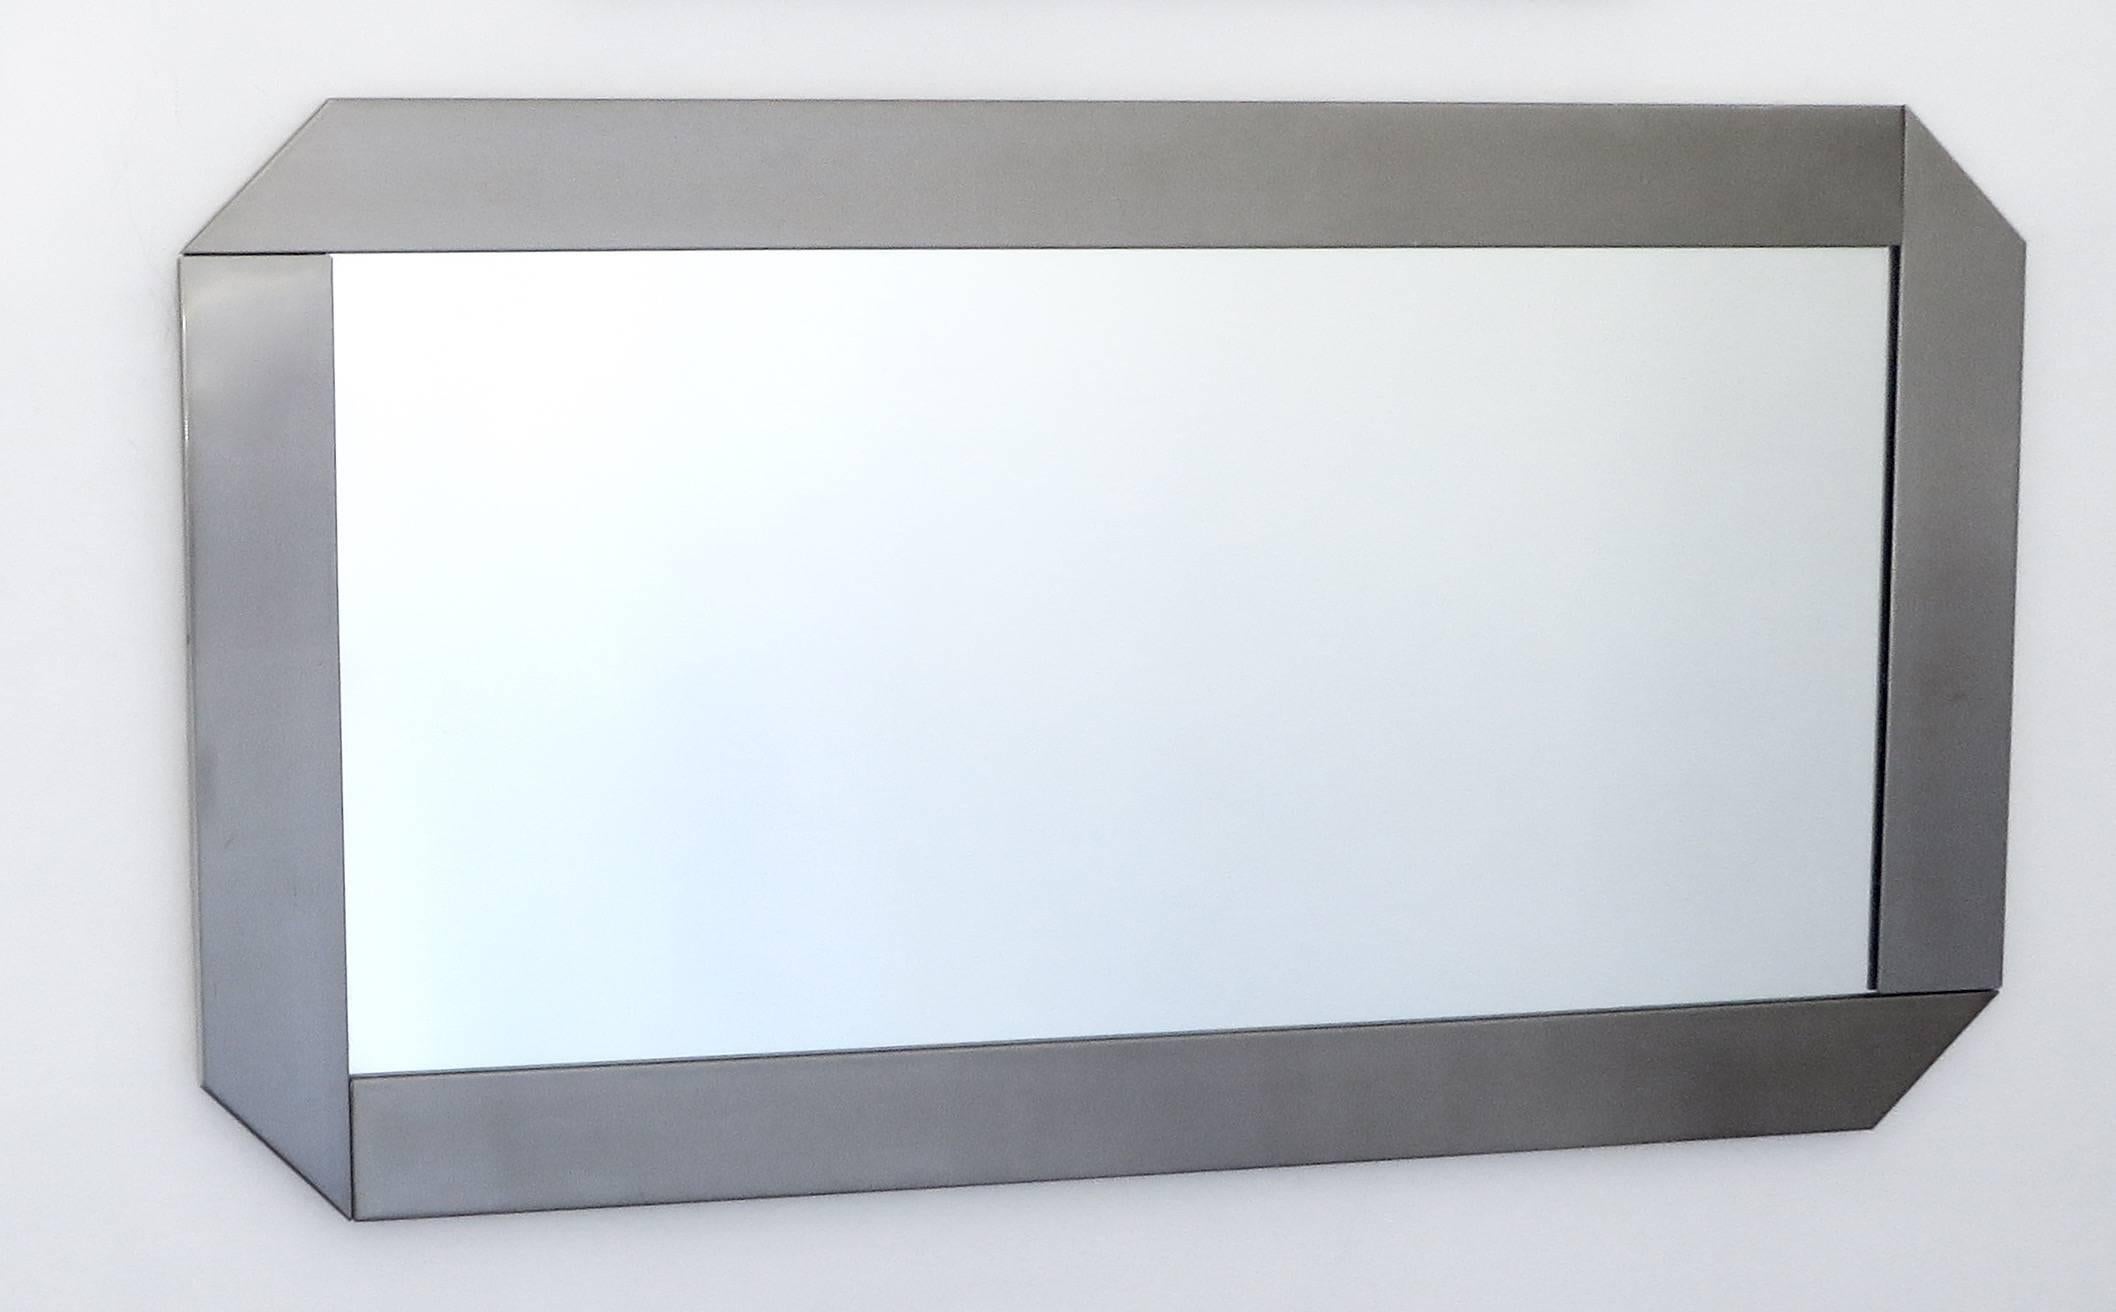 Two brushed steel mirrors by Valenti and are in the catalog Valenti.
Interesting detail on the corners as the steel appears to be folded.
These mirrors are made to be hung either horizontal as shown or vertical.
Italian, circa 1970.
Will